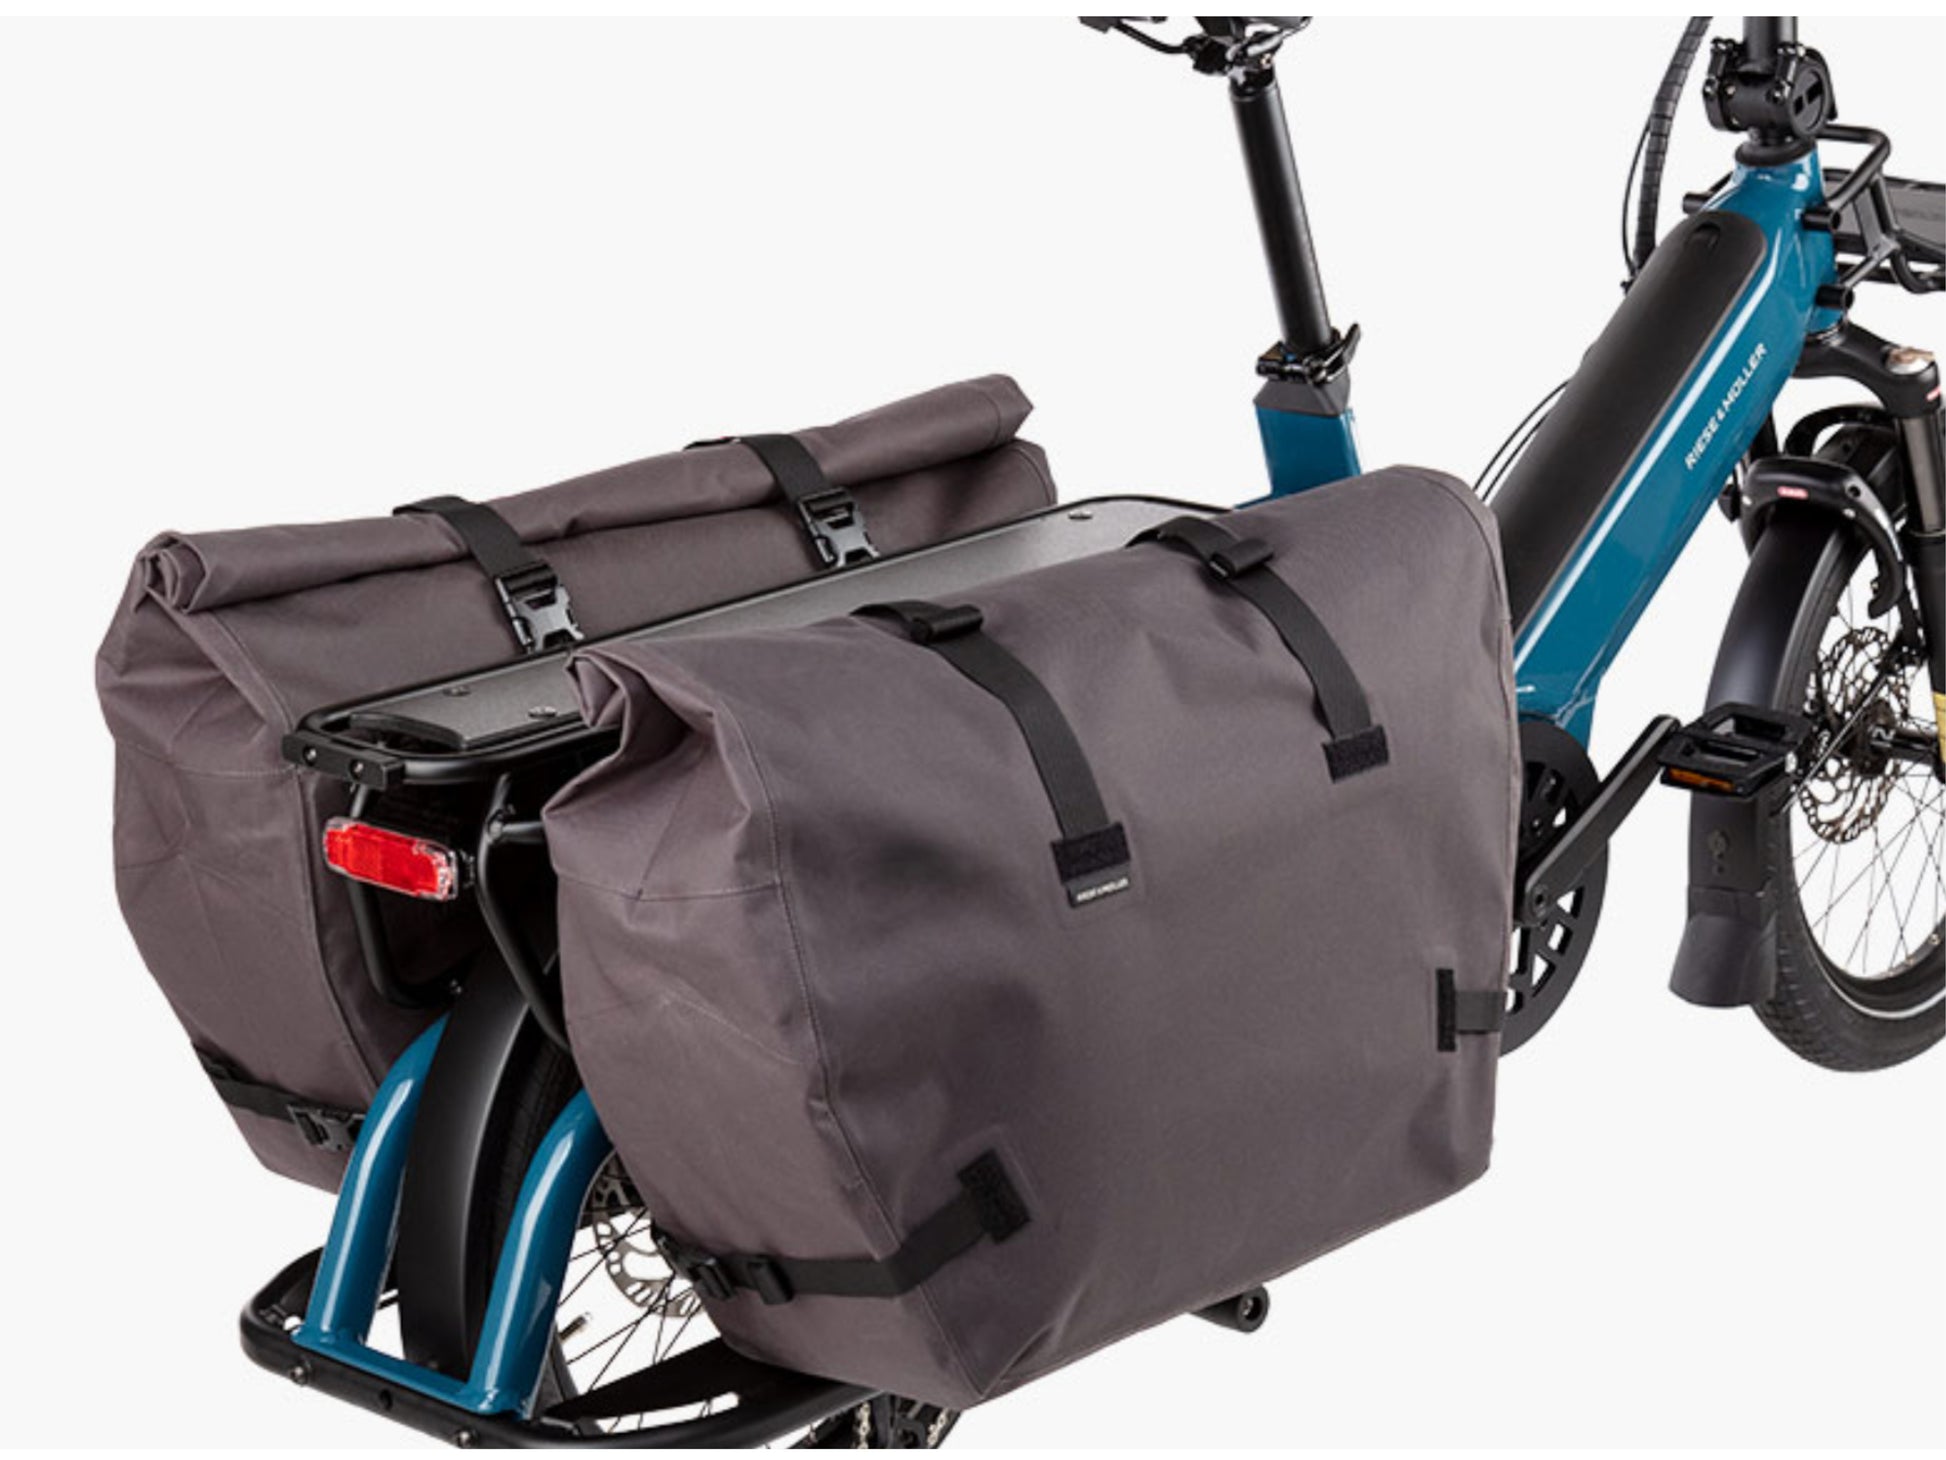 Riese & Muller Multitinker Touring eMtb hardtail close up cargo bags.